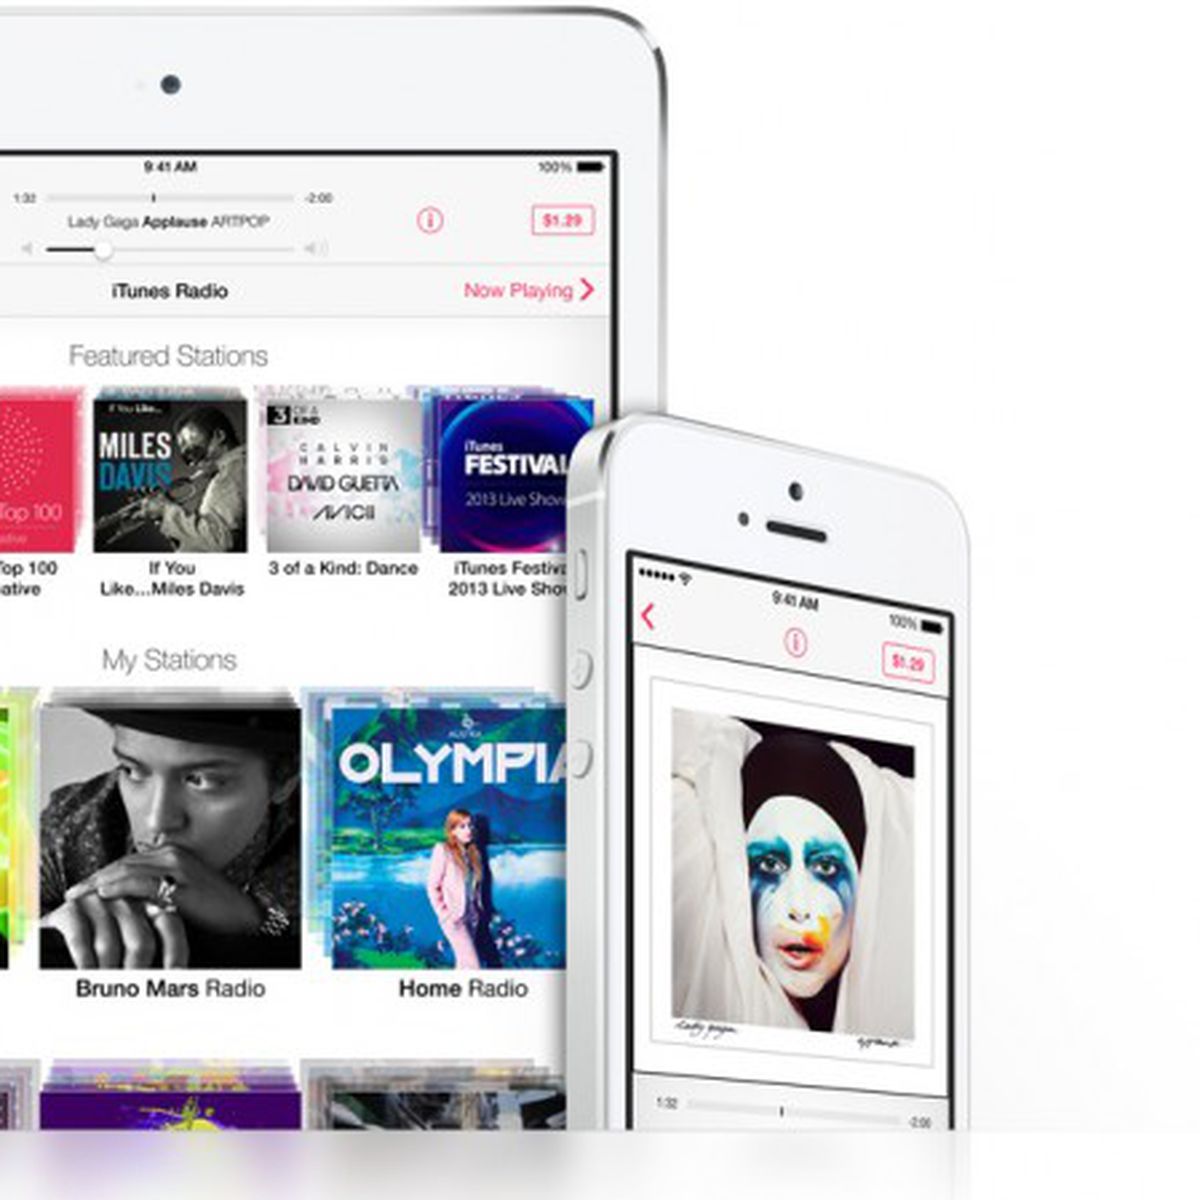 Apple S Itunes Radio Beats And Others Hit With Unpaid Royalty Suits Over Pre 1972 Music Macrumors